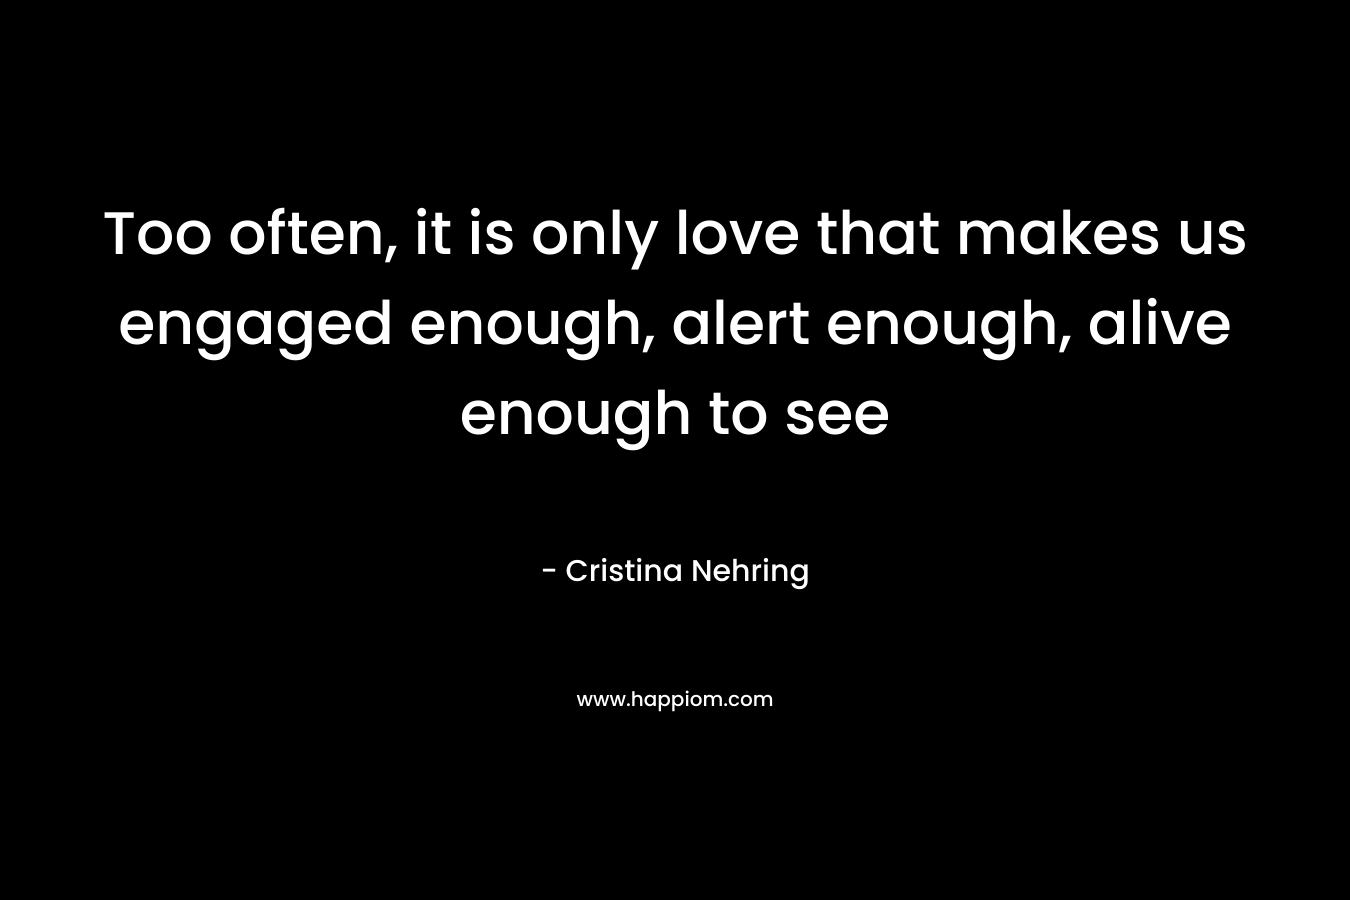 Too often, it is only love that makes us engaged enough, alert enough, alive enough to see – Cristina Nehring